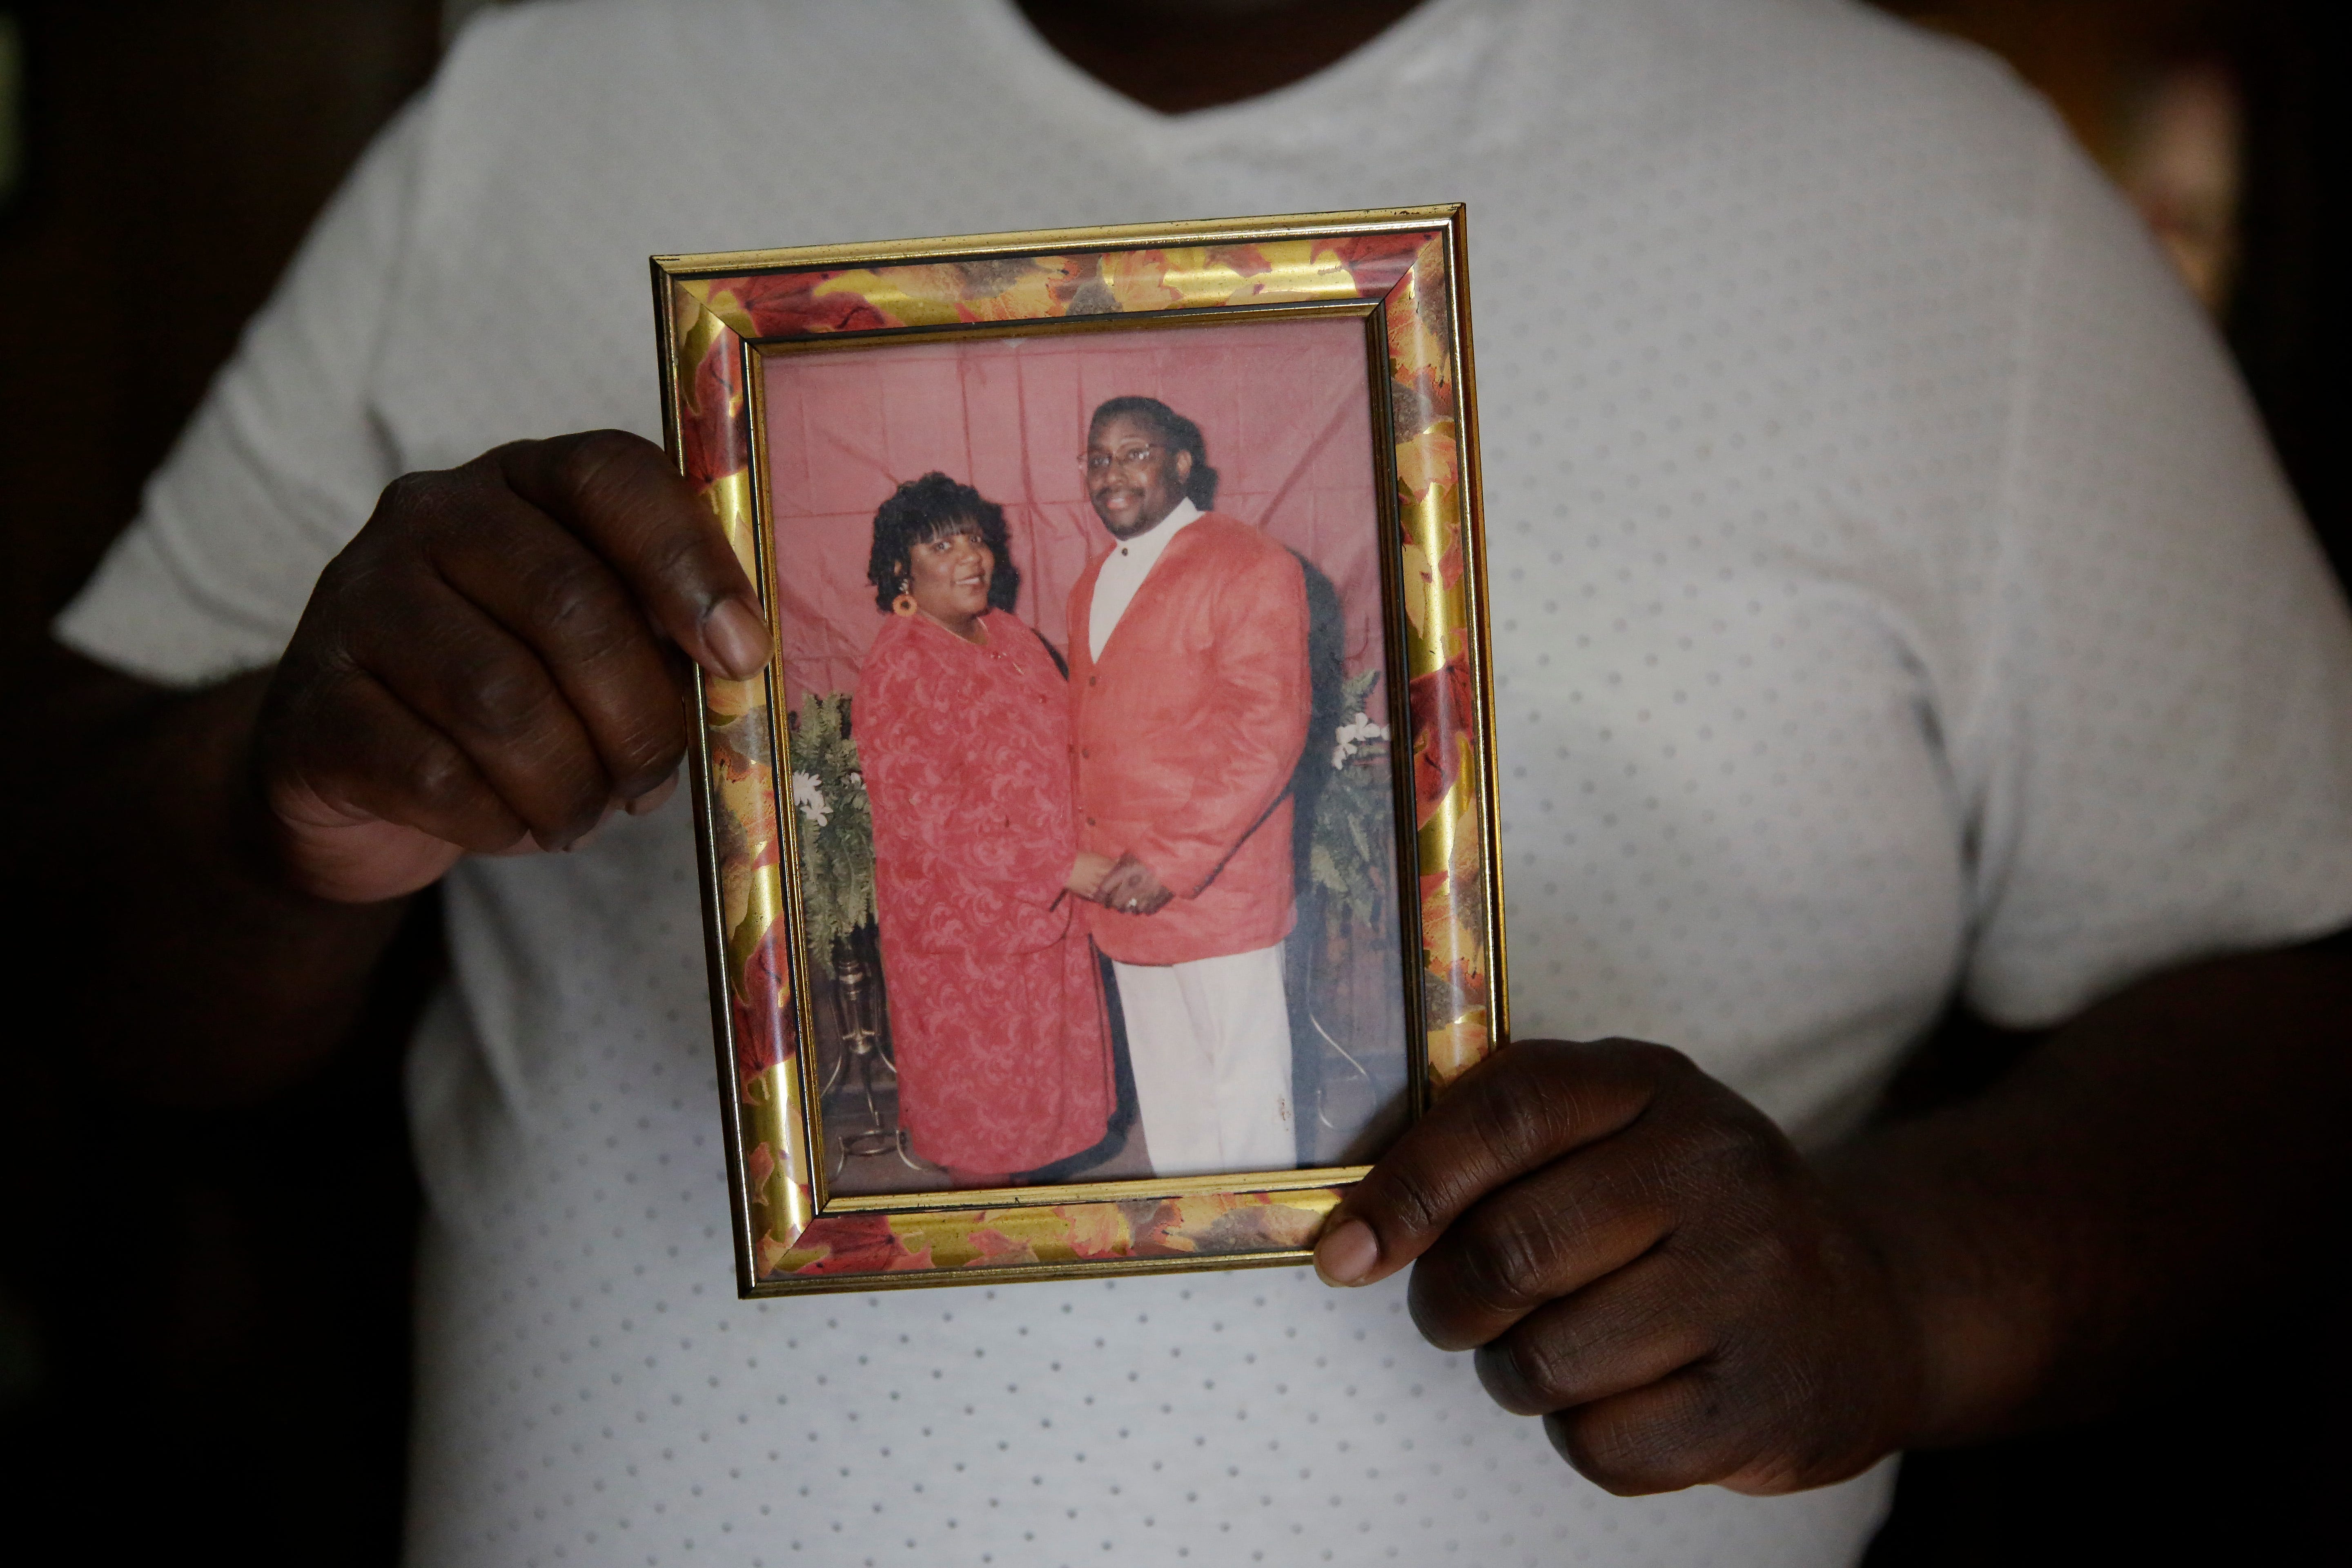 Desmond Tolbert holds a photograph of his parents, Nellie "Pollye Ann" Mae and Benjamin Tolbert, on Saturday, April 18, 2020, in Dawson, Ga. Pollye Ann and Benjamin both died of COVID-19 two days apart.